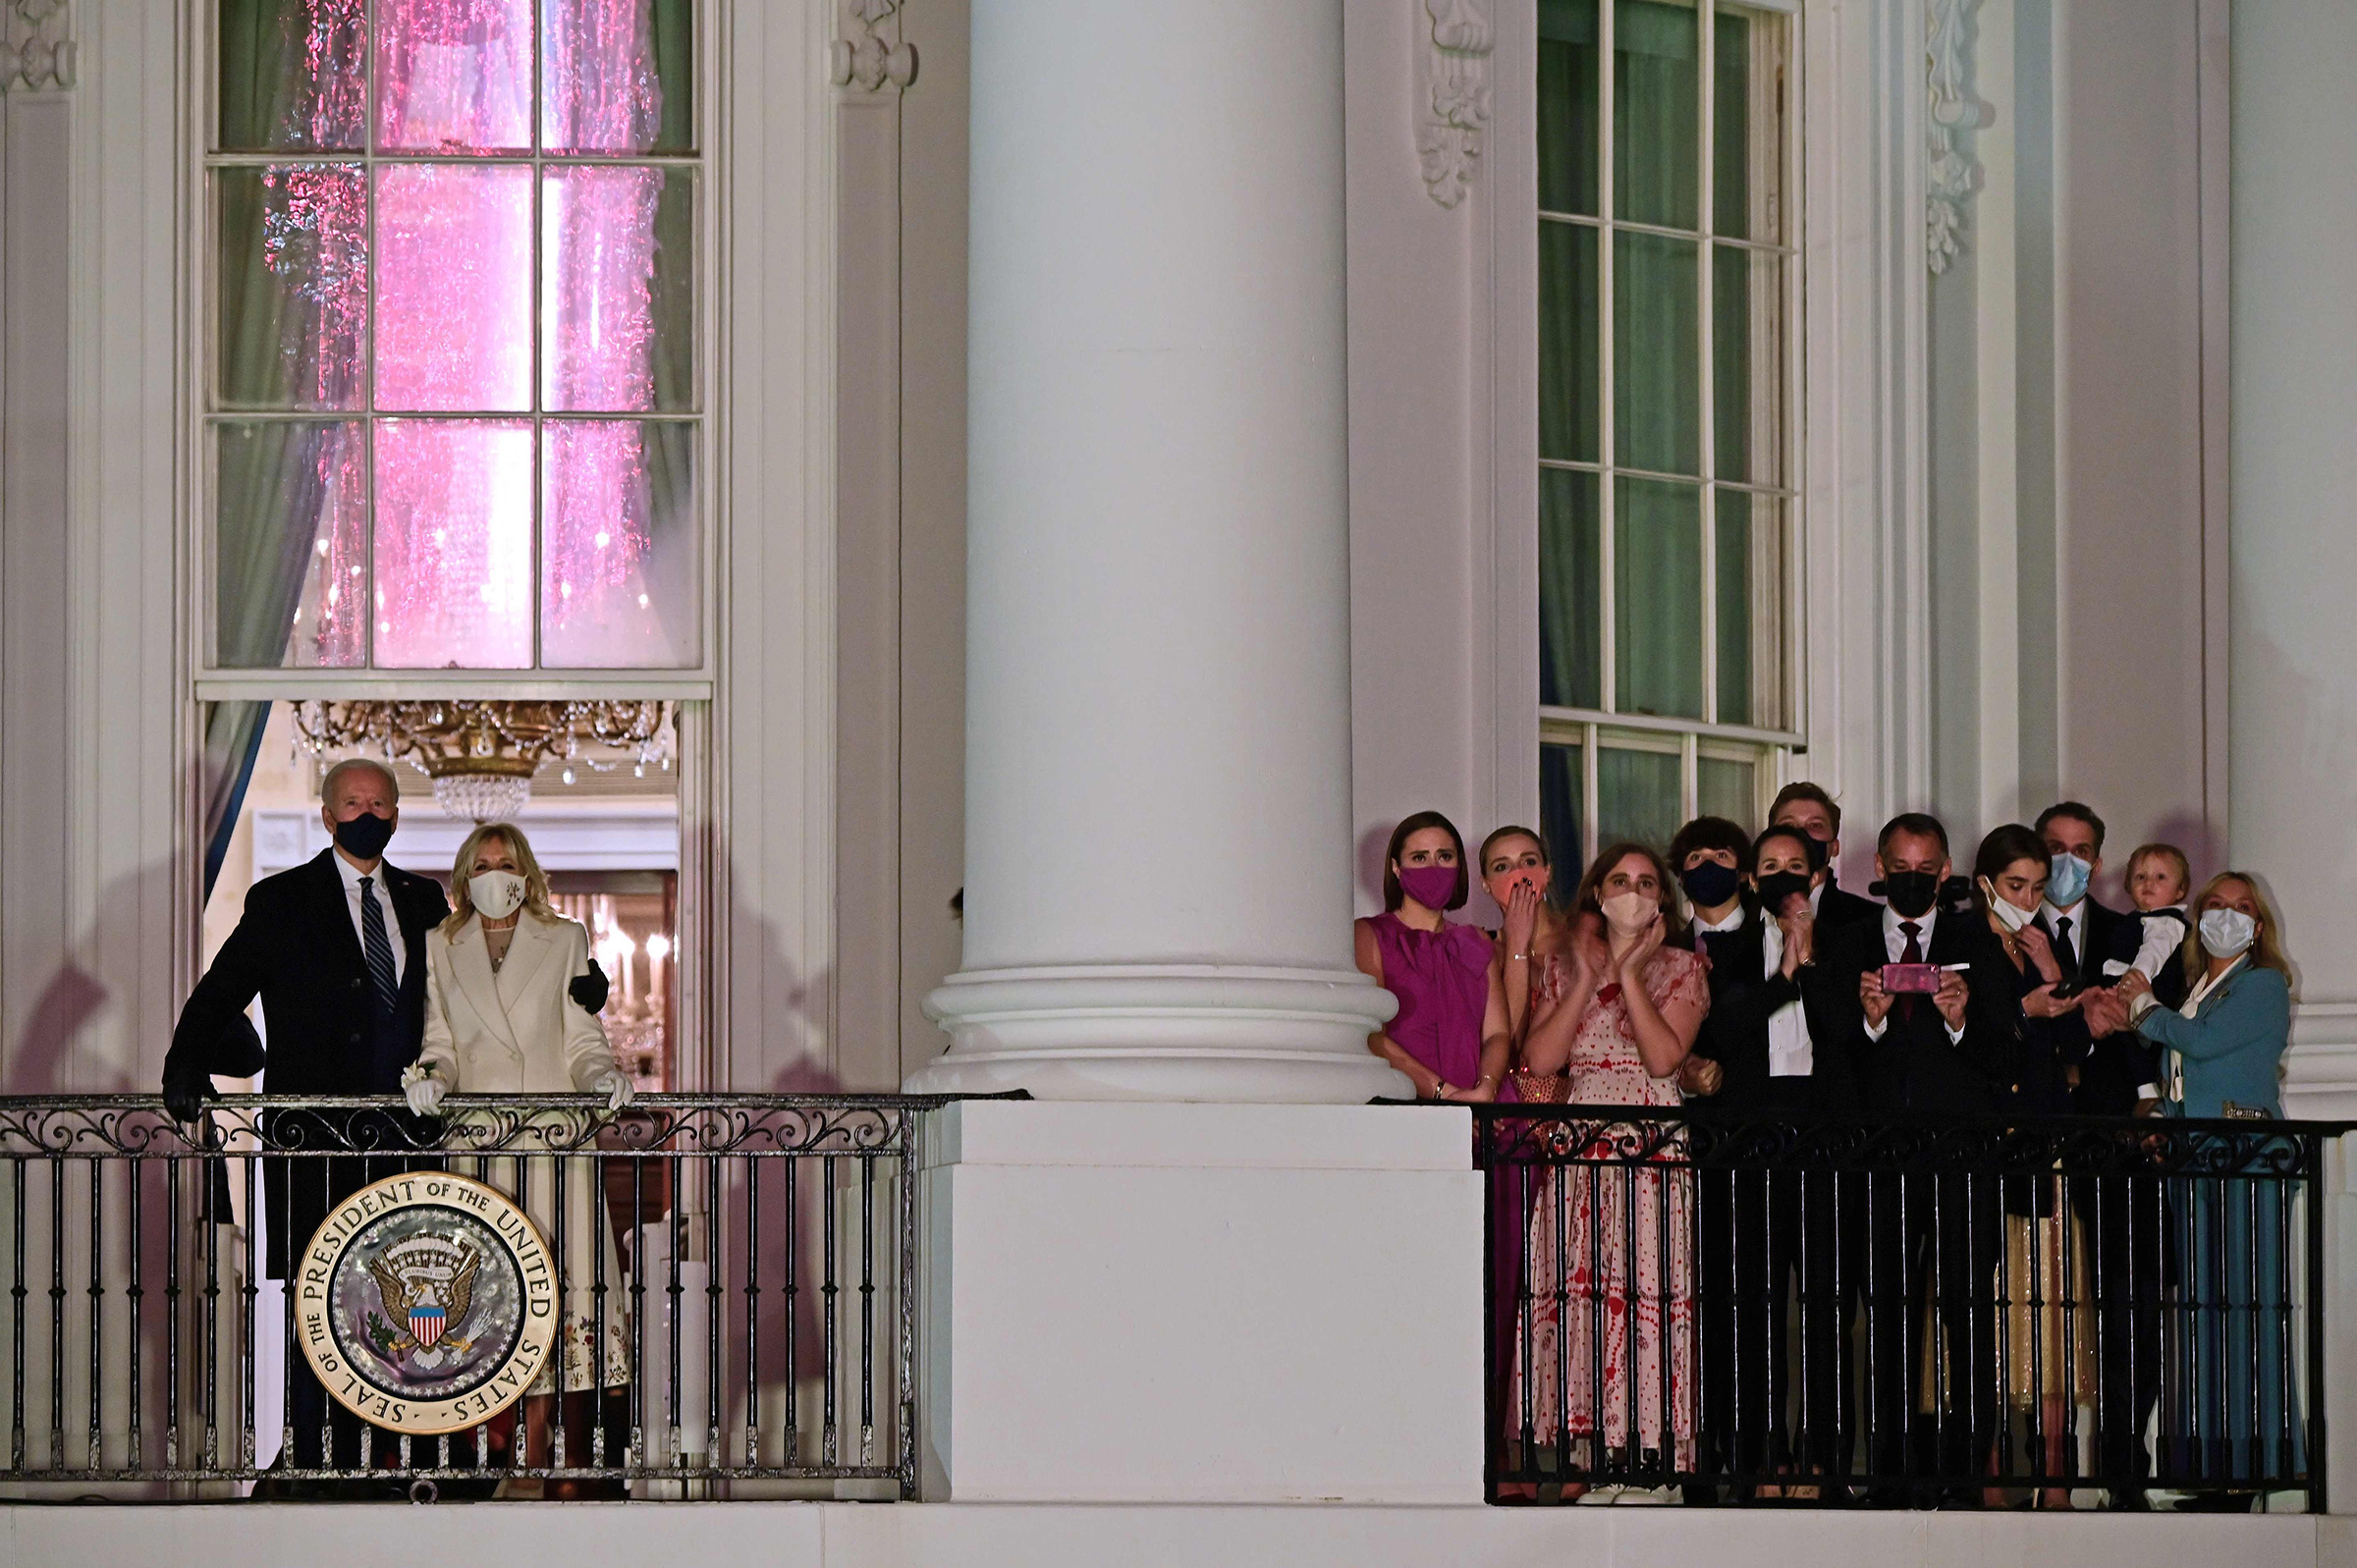 President Joe Biden, First Lady Dr. Jill Biden and family watch fireworks from the Blue Room Balcony of the White House.